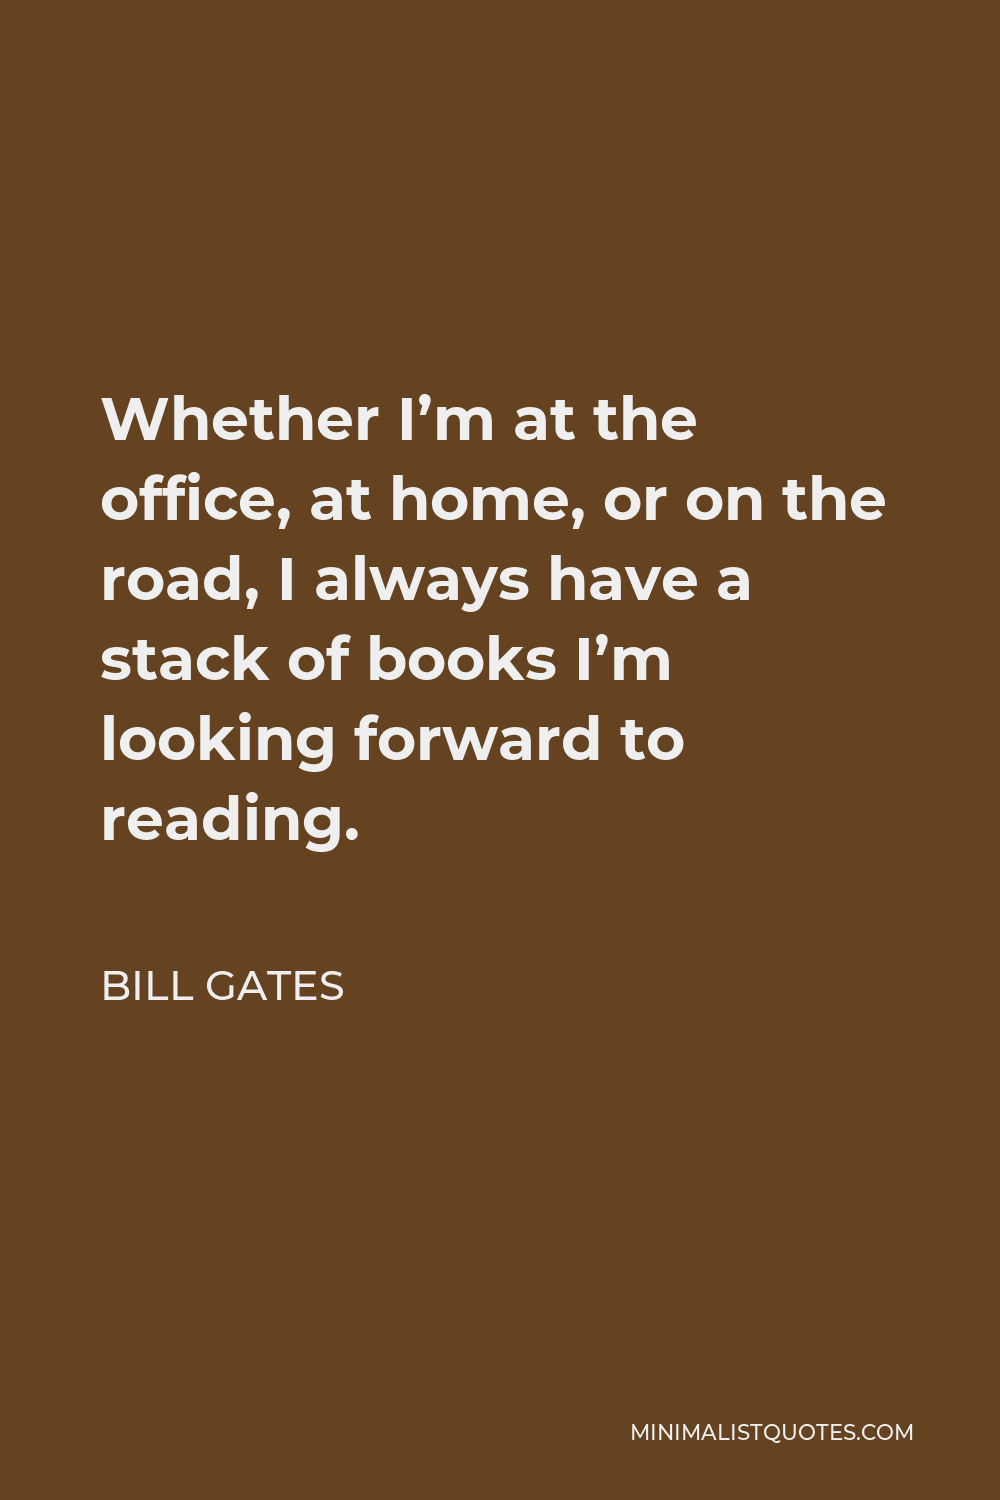 Bill Gates Quote - Whether I’m at the office, at home, or on the road, I always have a stack of books I’m looking forward to reading.